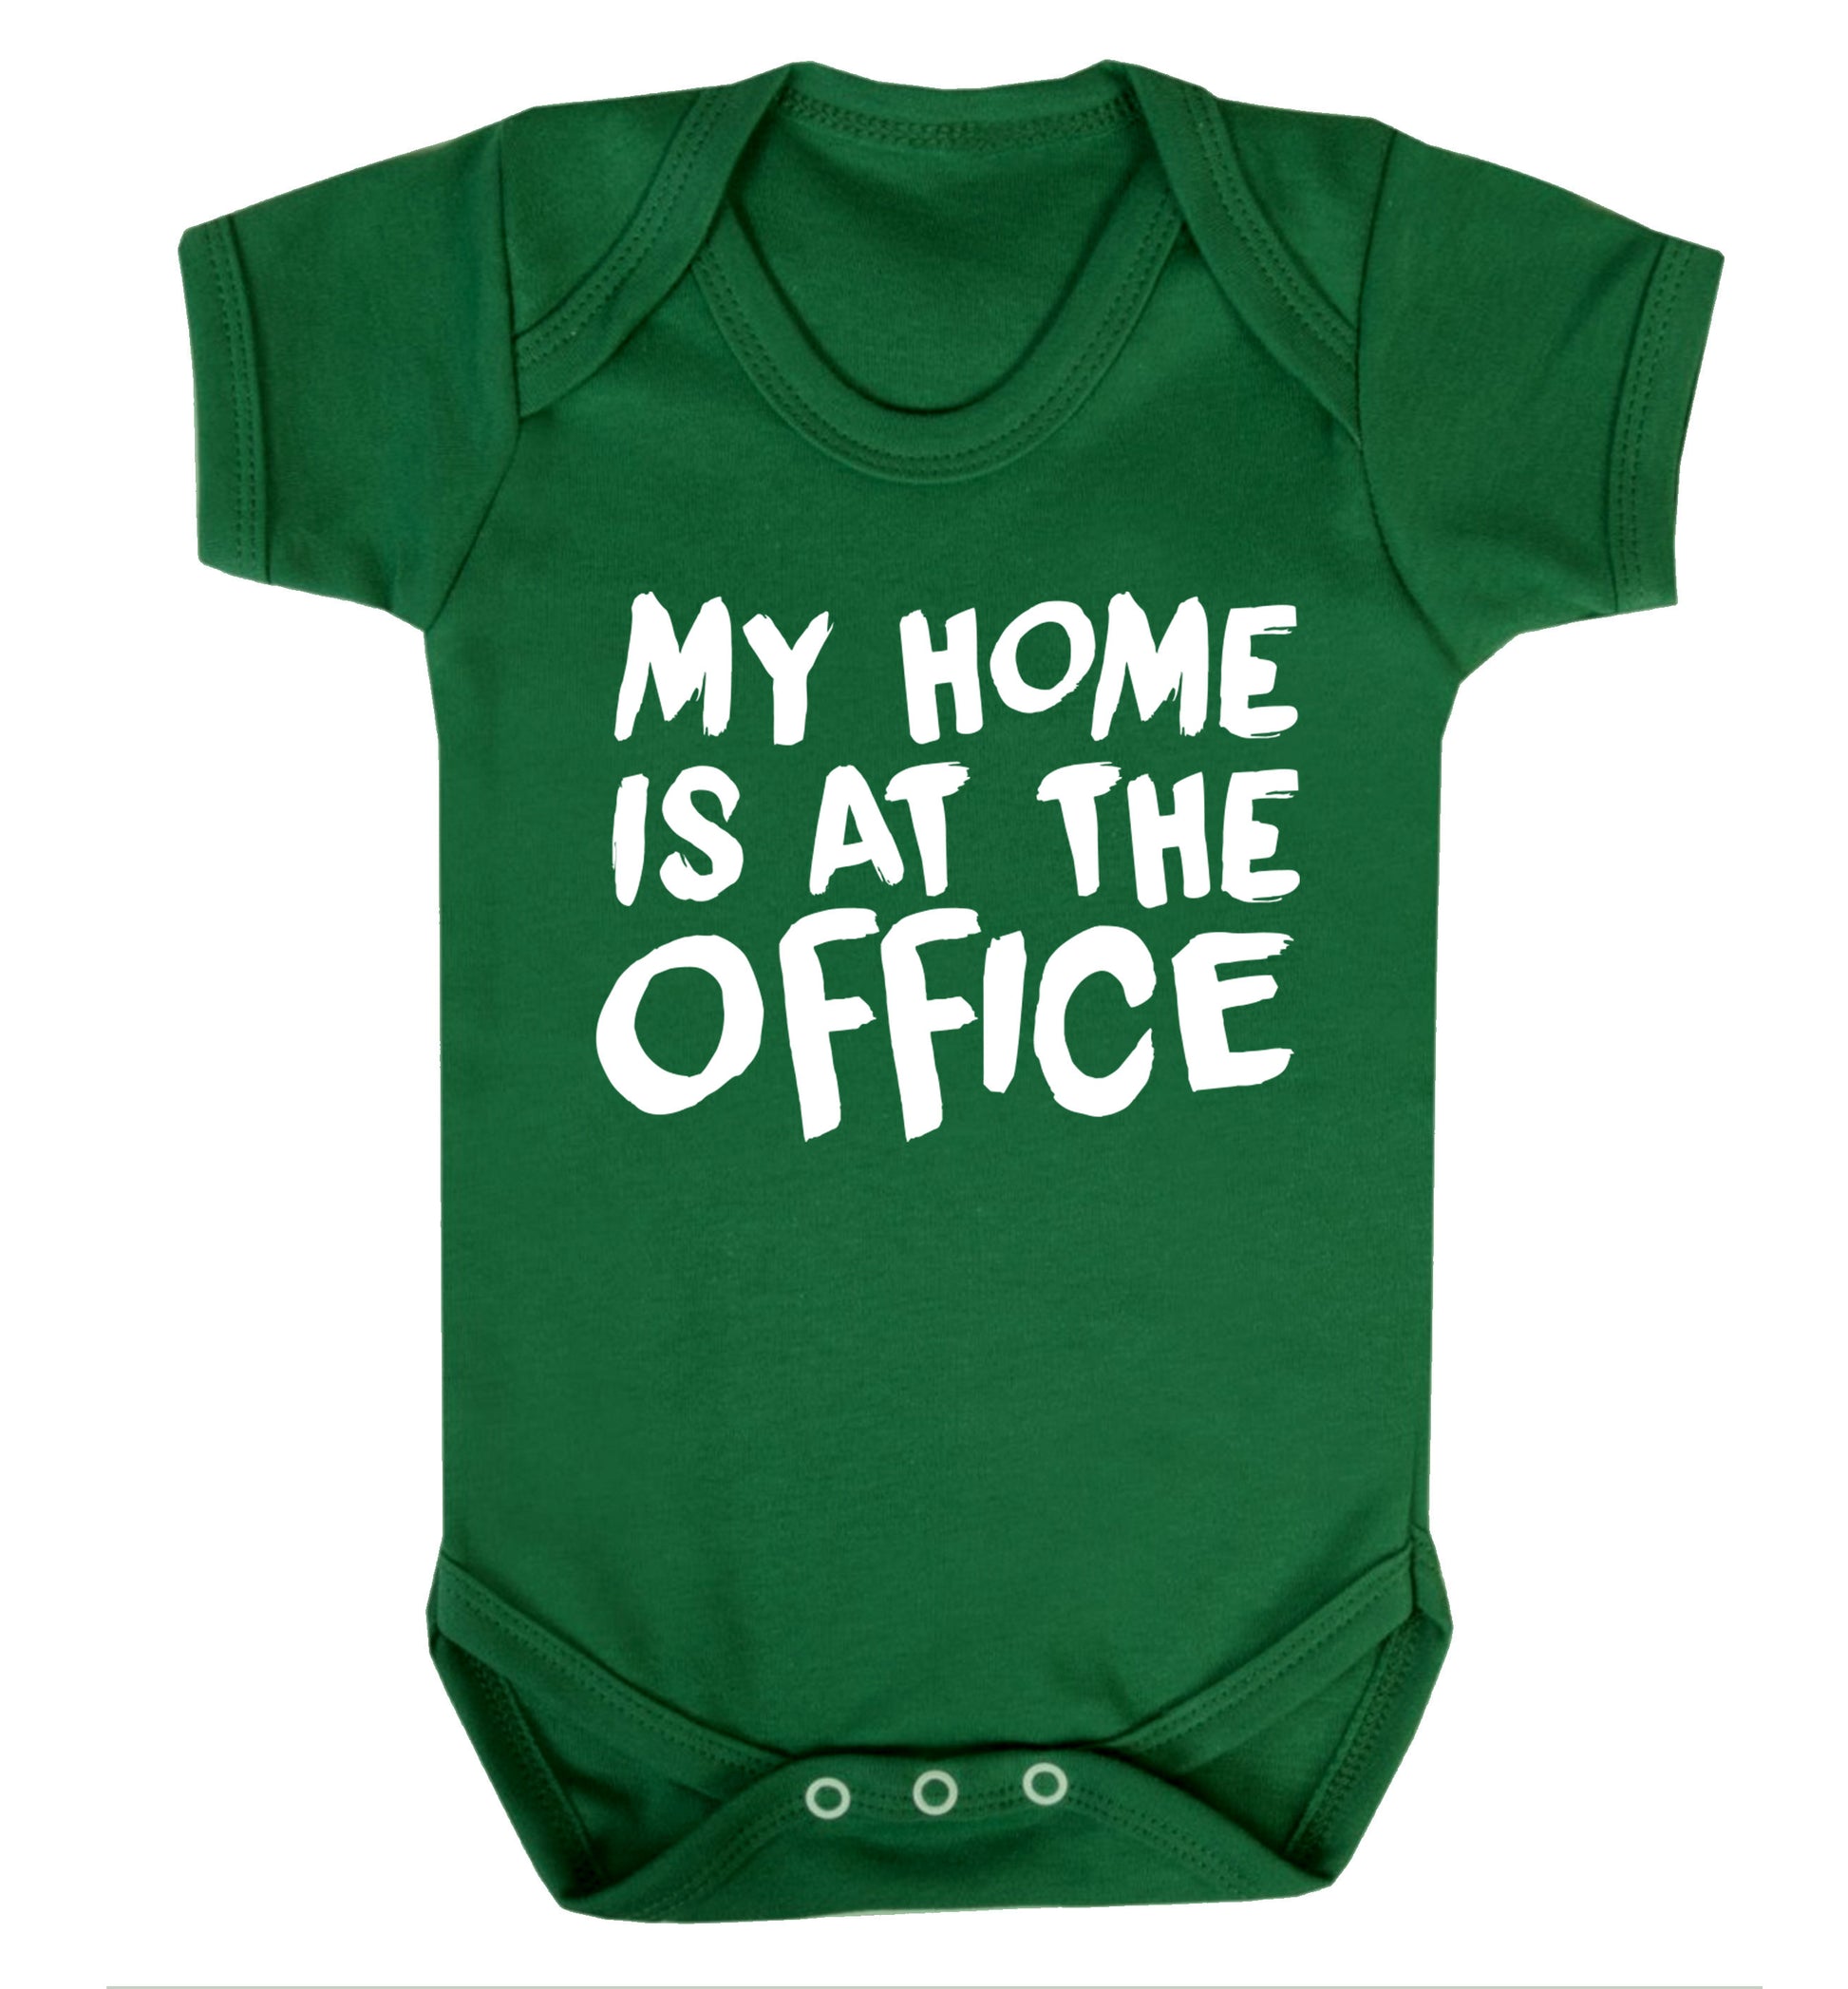 My home is at the office Baby Vest green 18-24 months